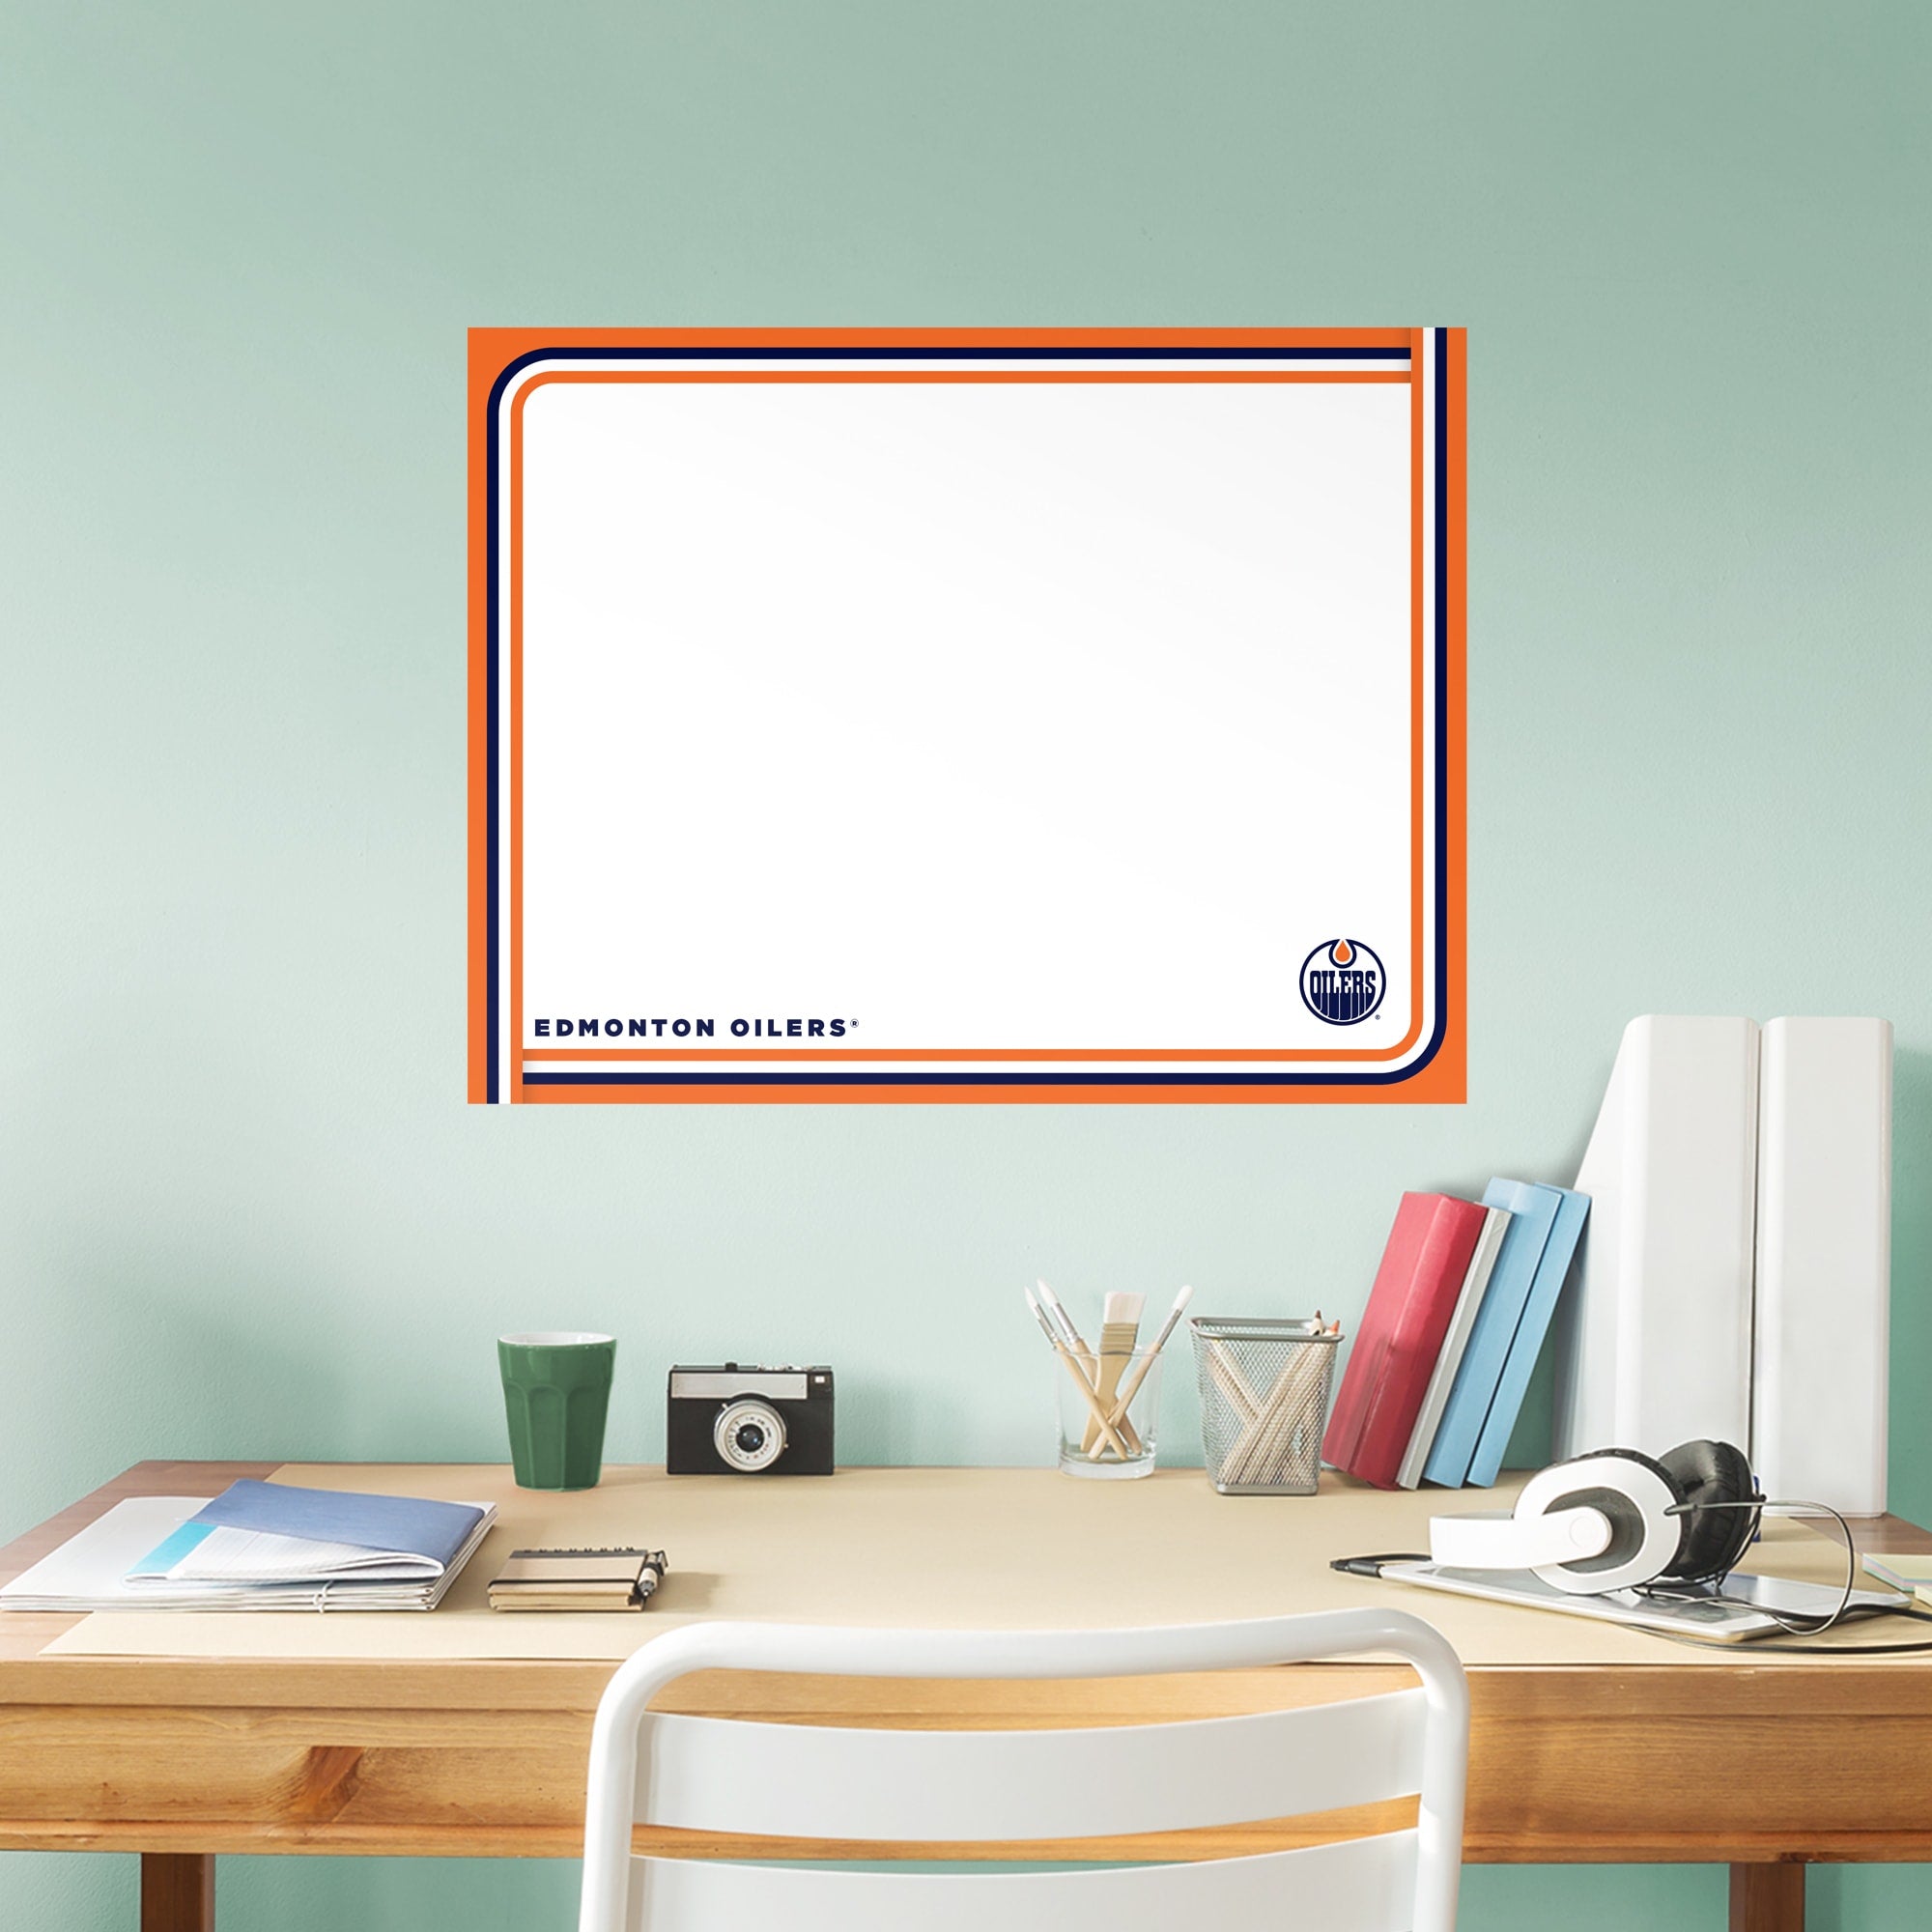 Edmonton Oilers: Dry Erase Whiteboard - X-Large Officially Licensed NHL Removable Wall Decal XL by Fathead | Vinyl